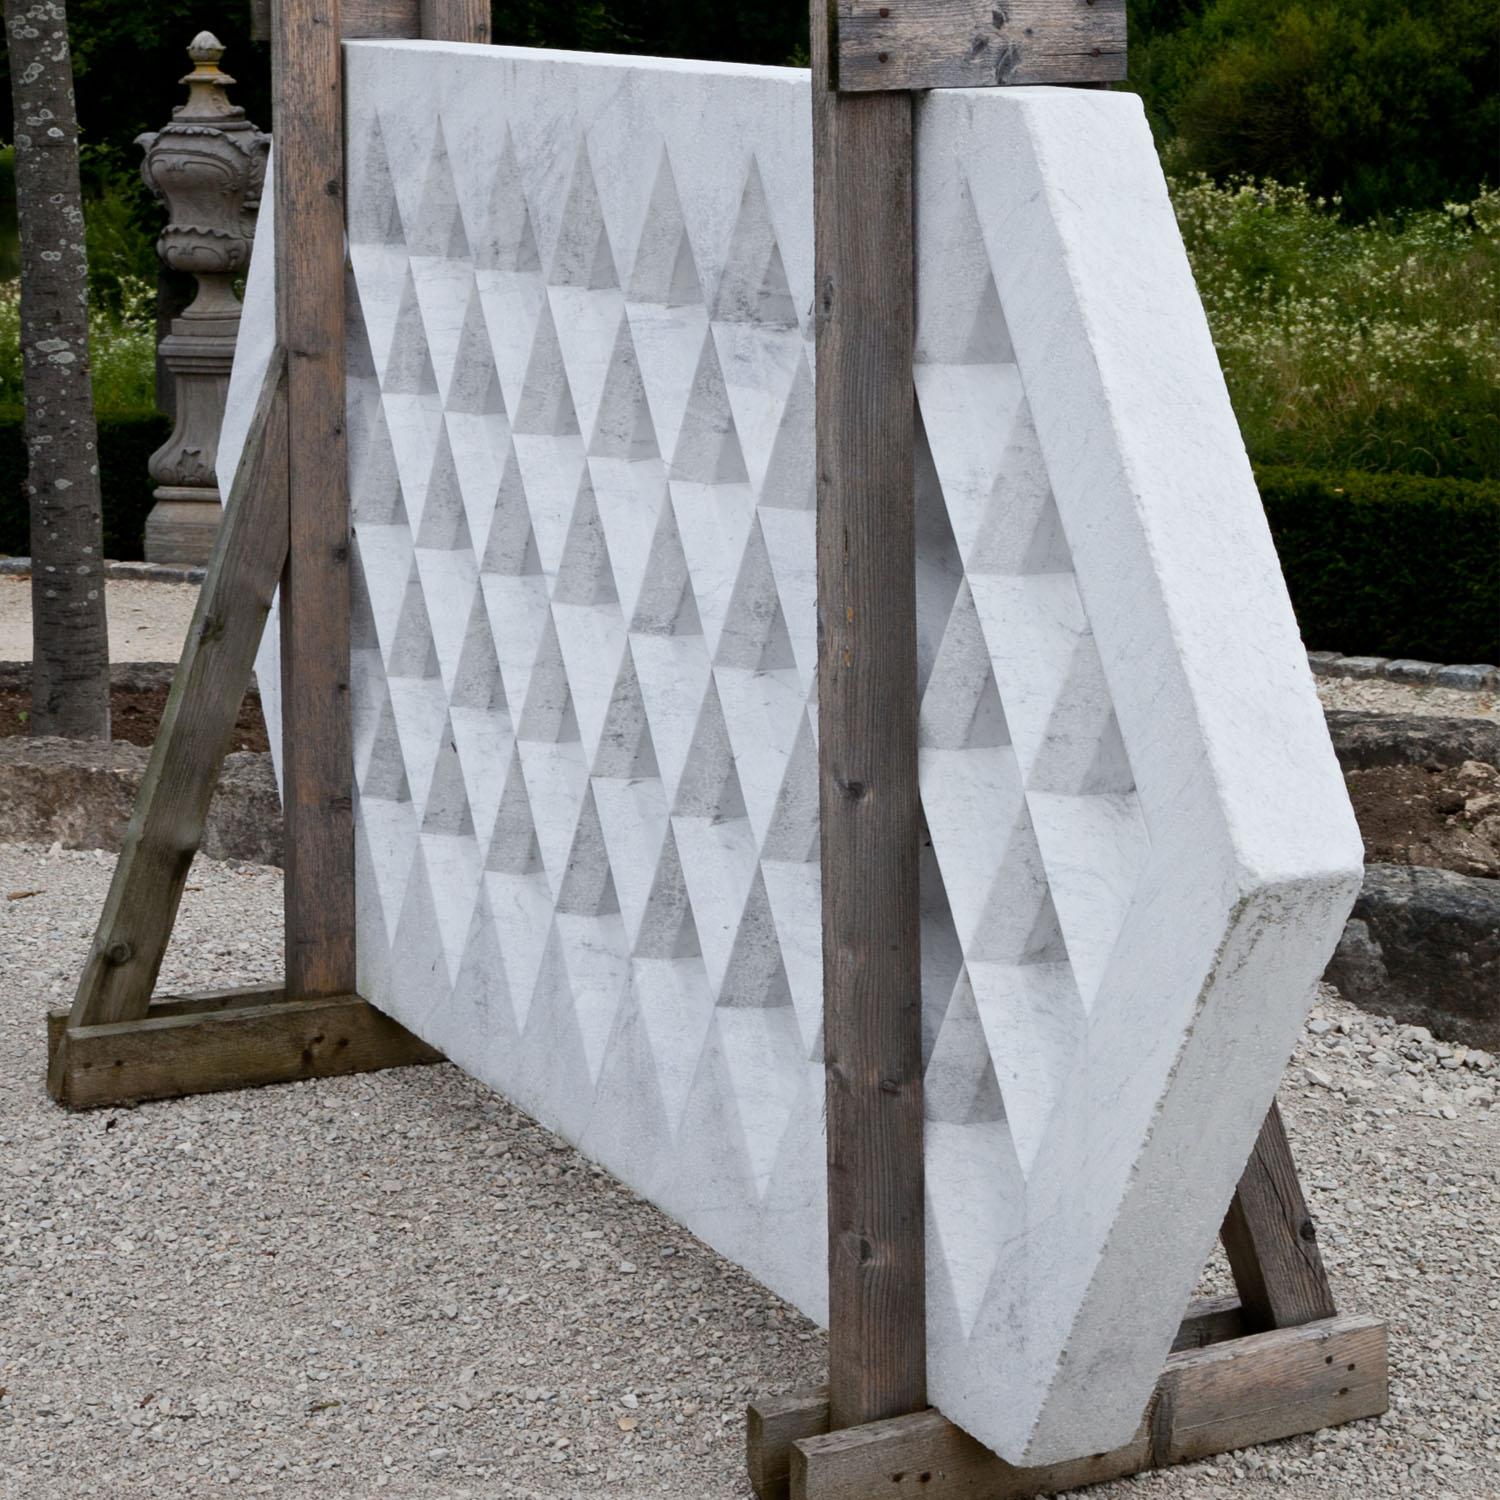 Modern hexagonal divider with a rhomboid grid pattern, carved in one piece out of white marble.